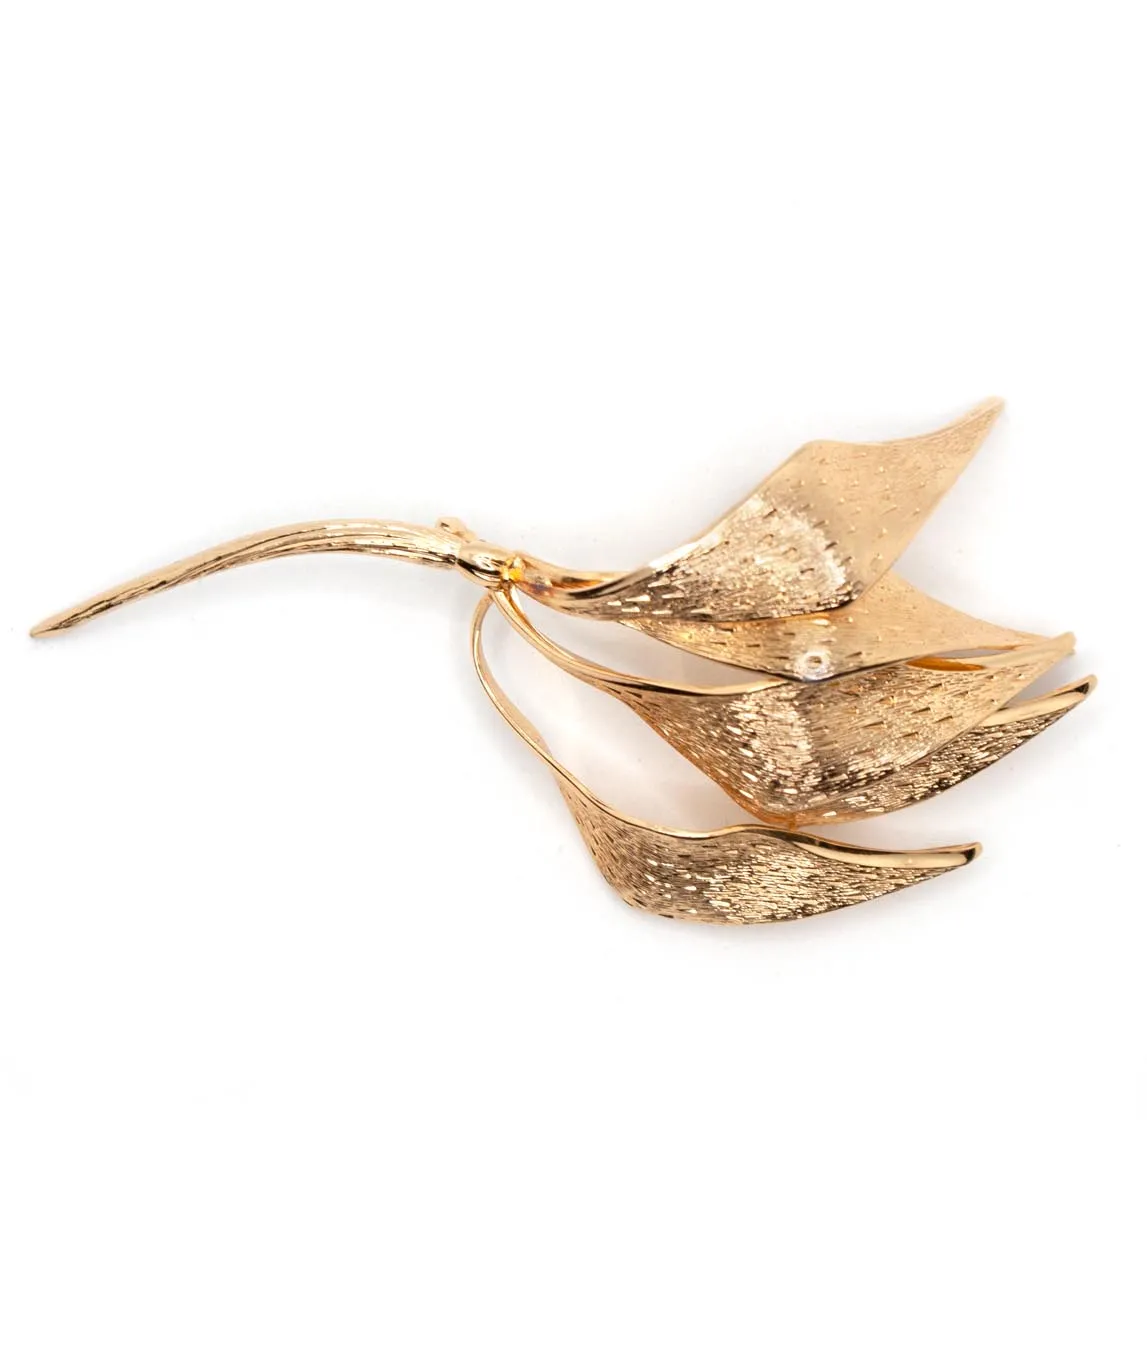 Gold-plated multi-leaf brooch by Henkel and Grosse with textured metal leaves top view